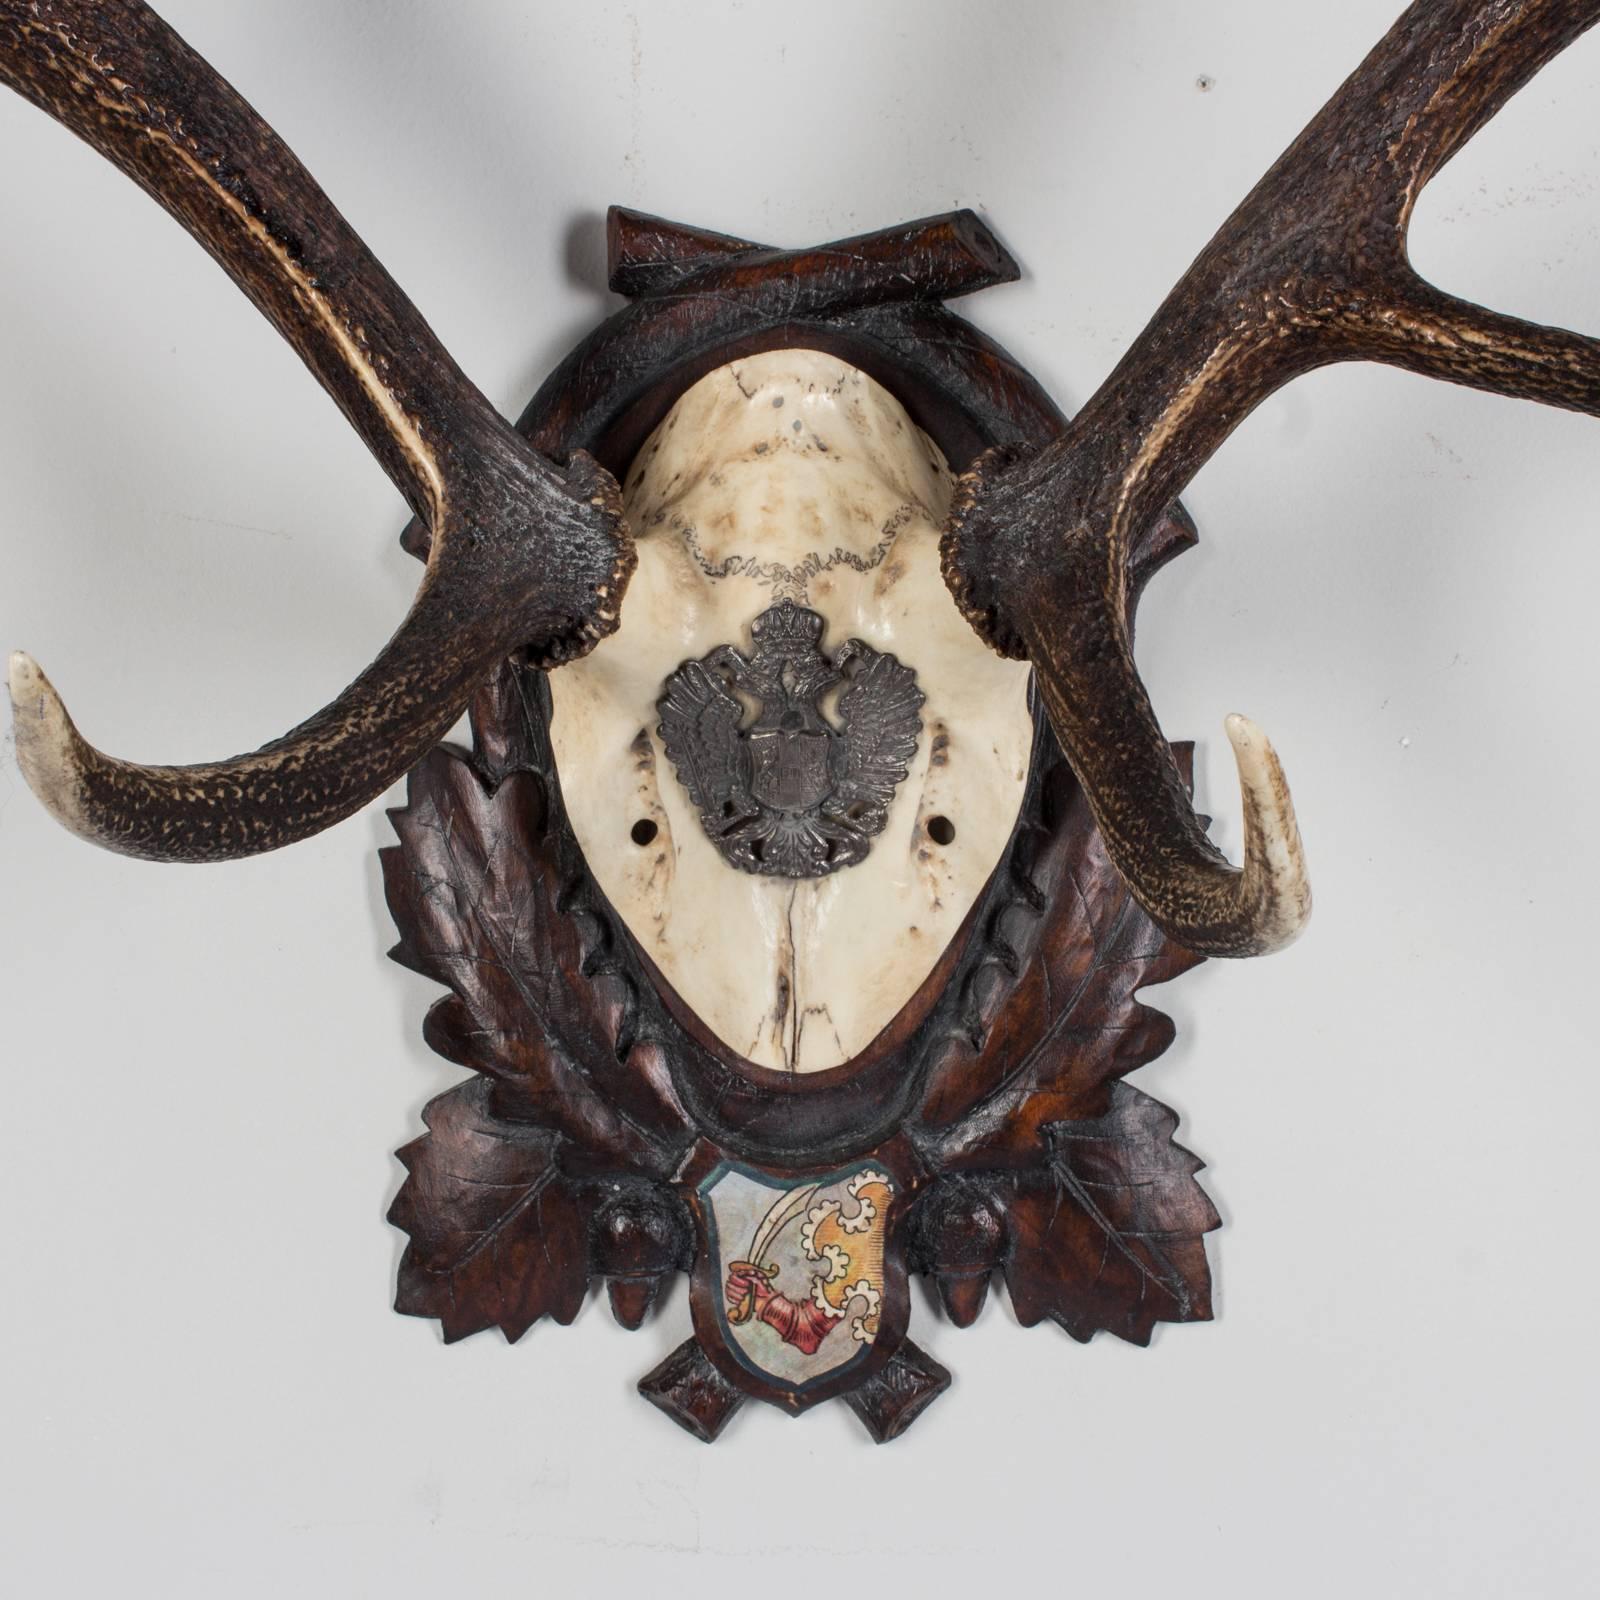 19th century Austrian red stag on original black forest carved plaque that hung in Emperor Franz Joseph's castle at Eckartsau in the Southern Austrian Alps. Eckartsau was a favorite hunting schloss of the Habsburg family. The plaque itself is